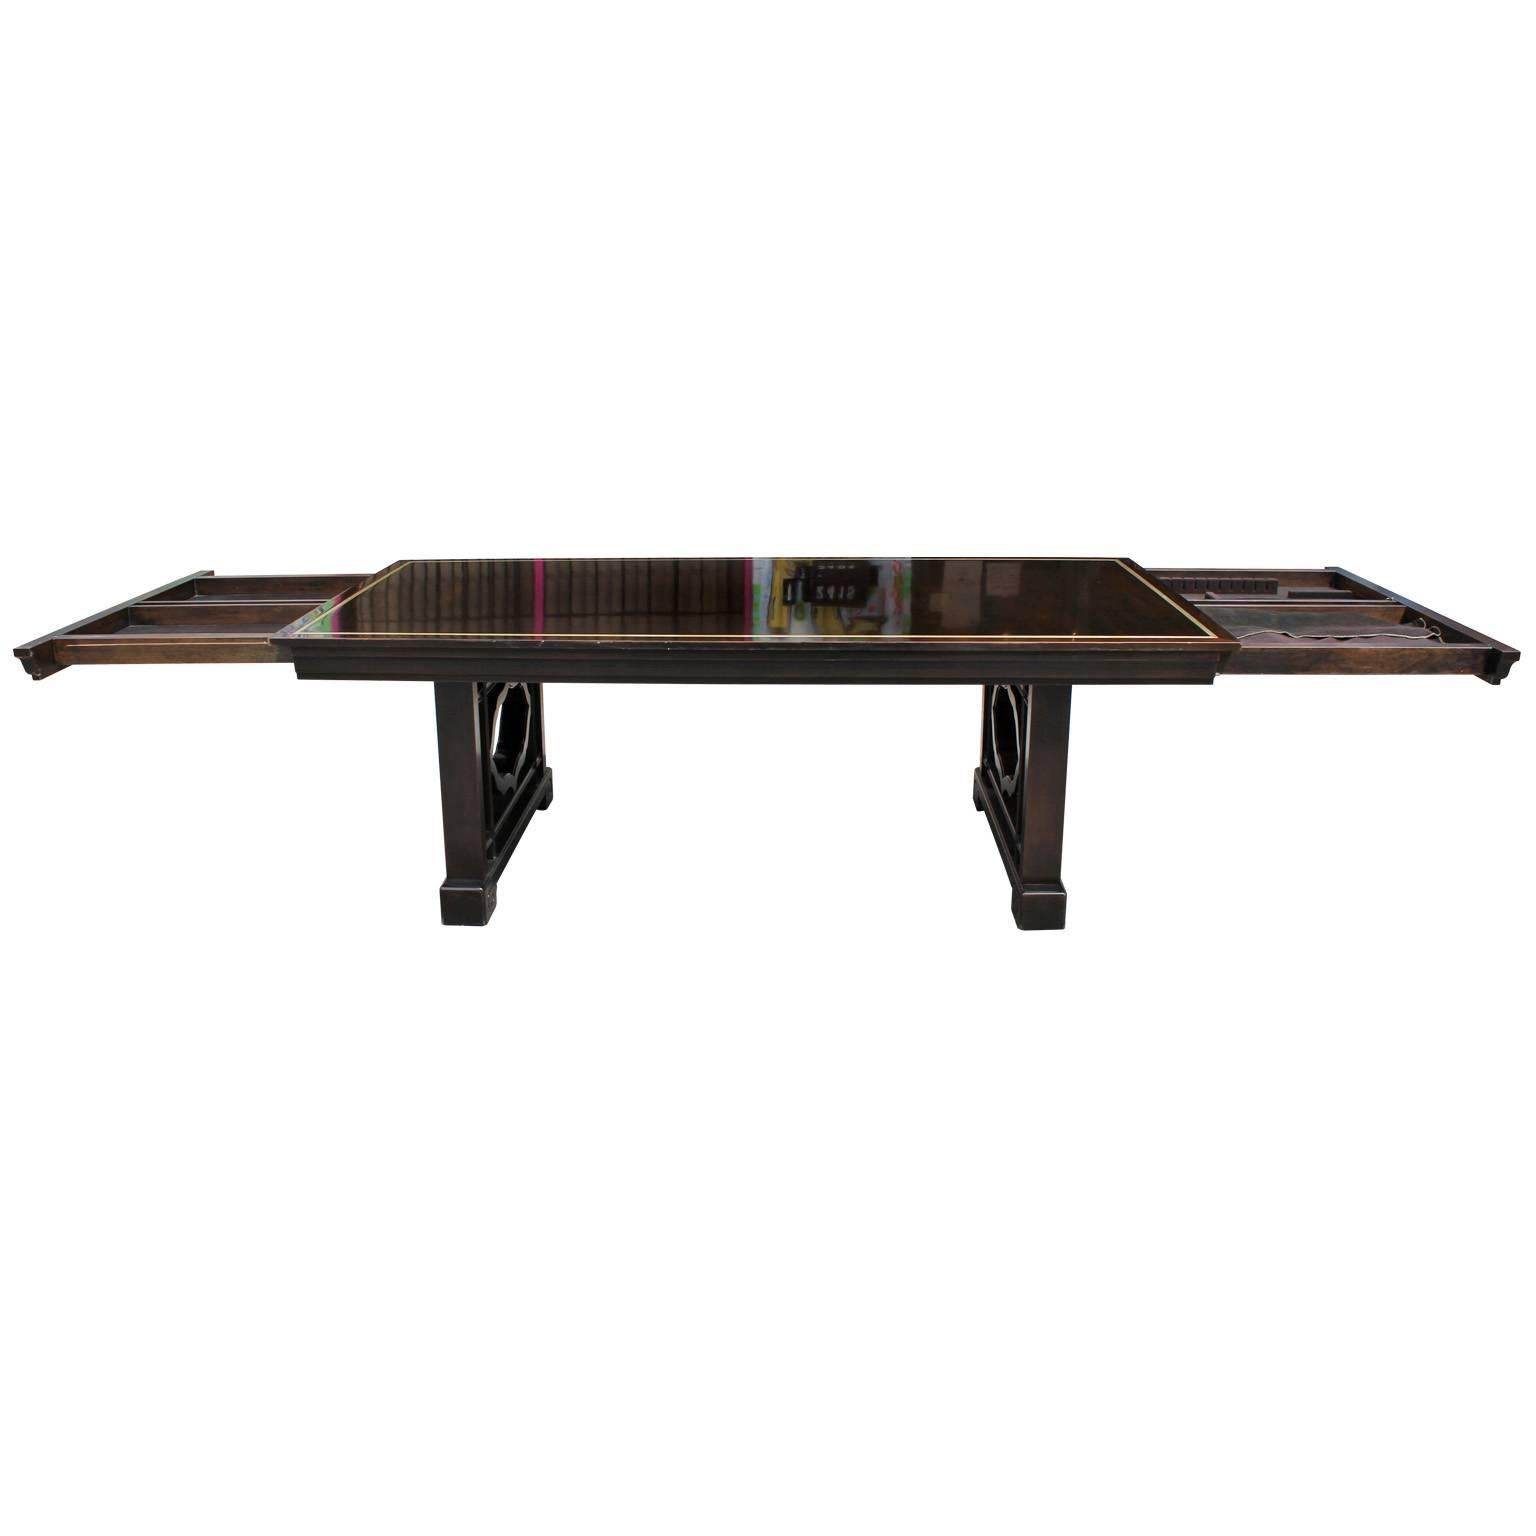 Hollywood Regency Elegant Widdicomb Modern Dining Table with Service Drawers and Brass Band Accent